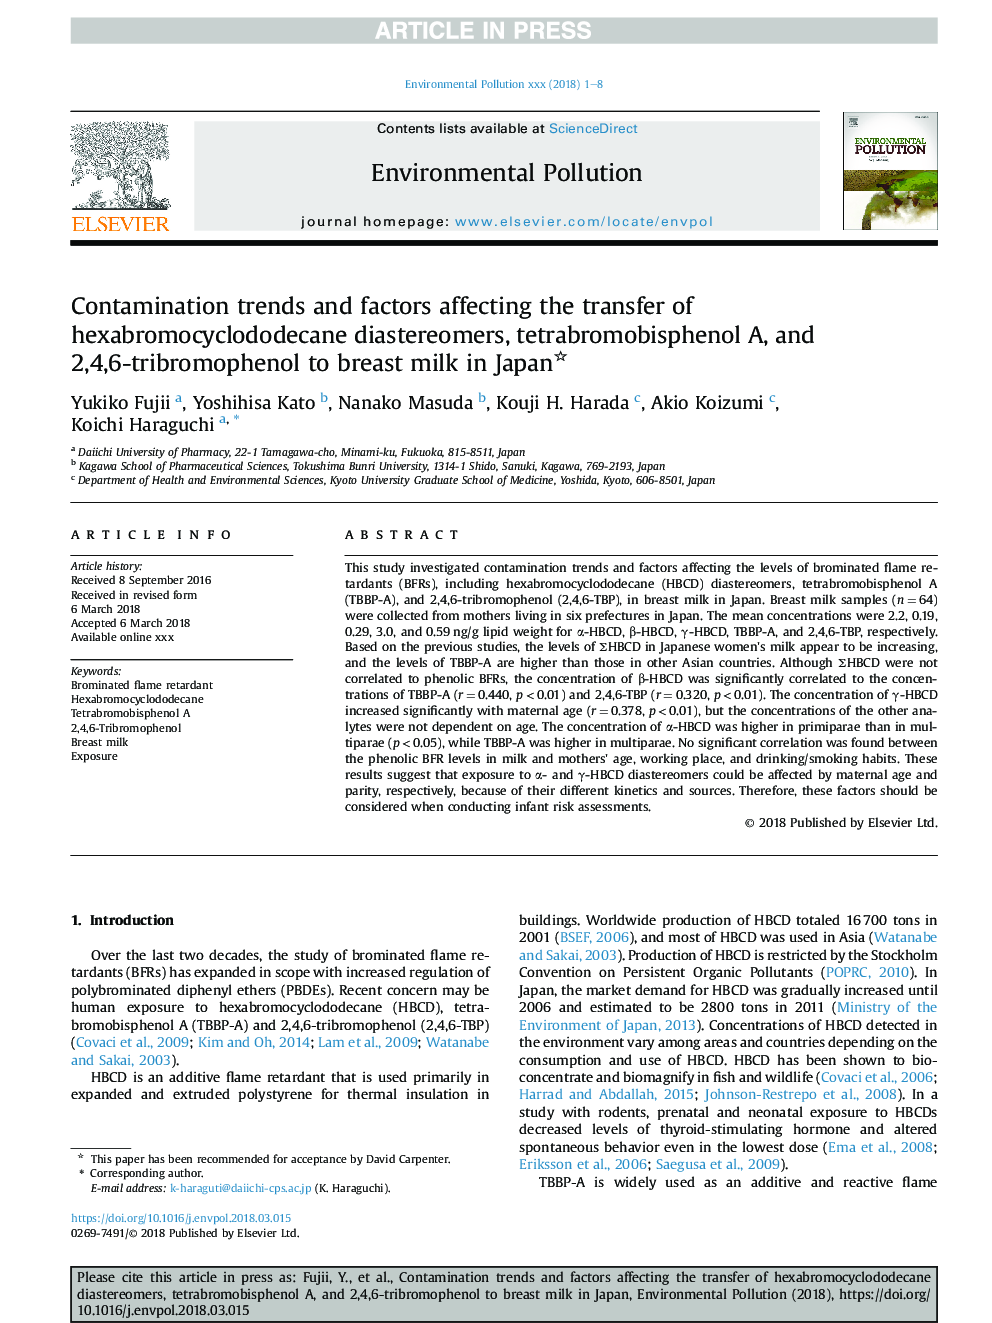 Contamination trends and factors affecting the transfer of hexabromocyclododecane diastereomers, tetrabromobisphenol A, and 2,4,6-tribromophenol to breast milk in Japan